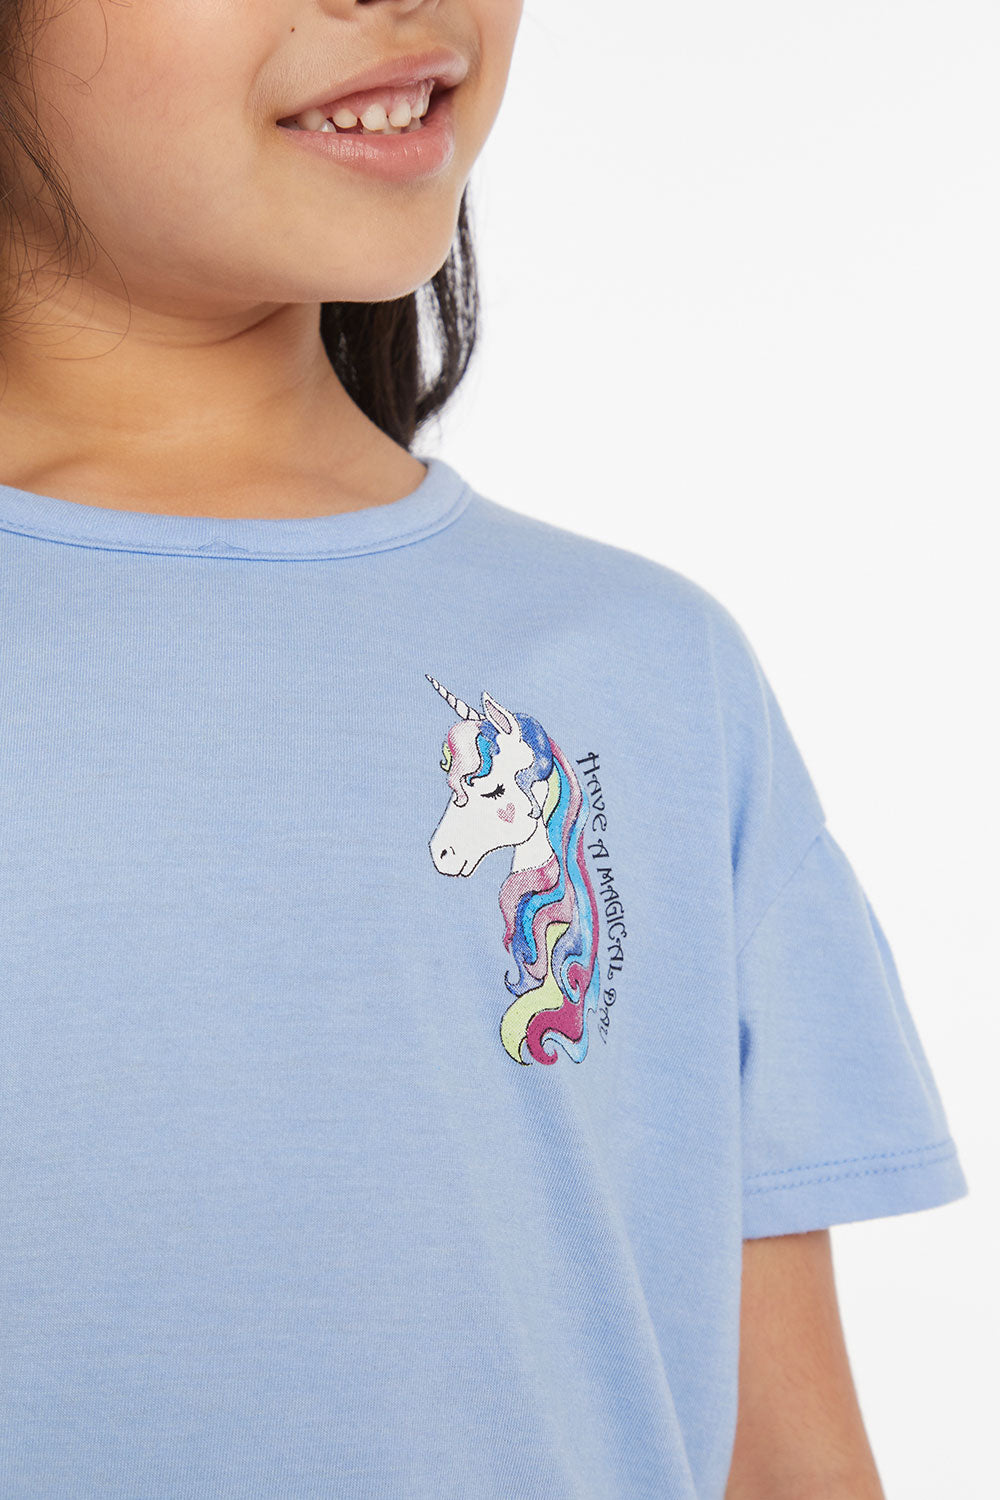 Magical Day Girls Tee Girls chaserbrand